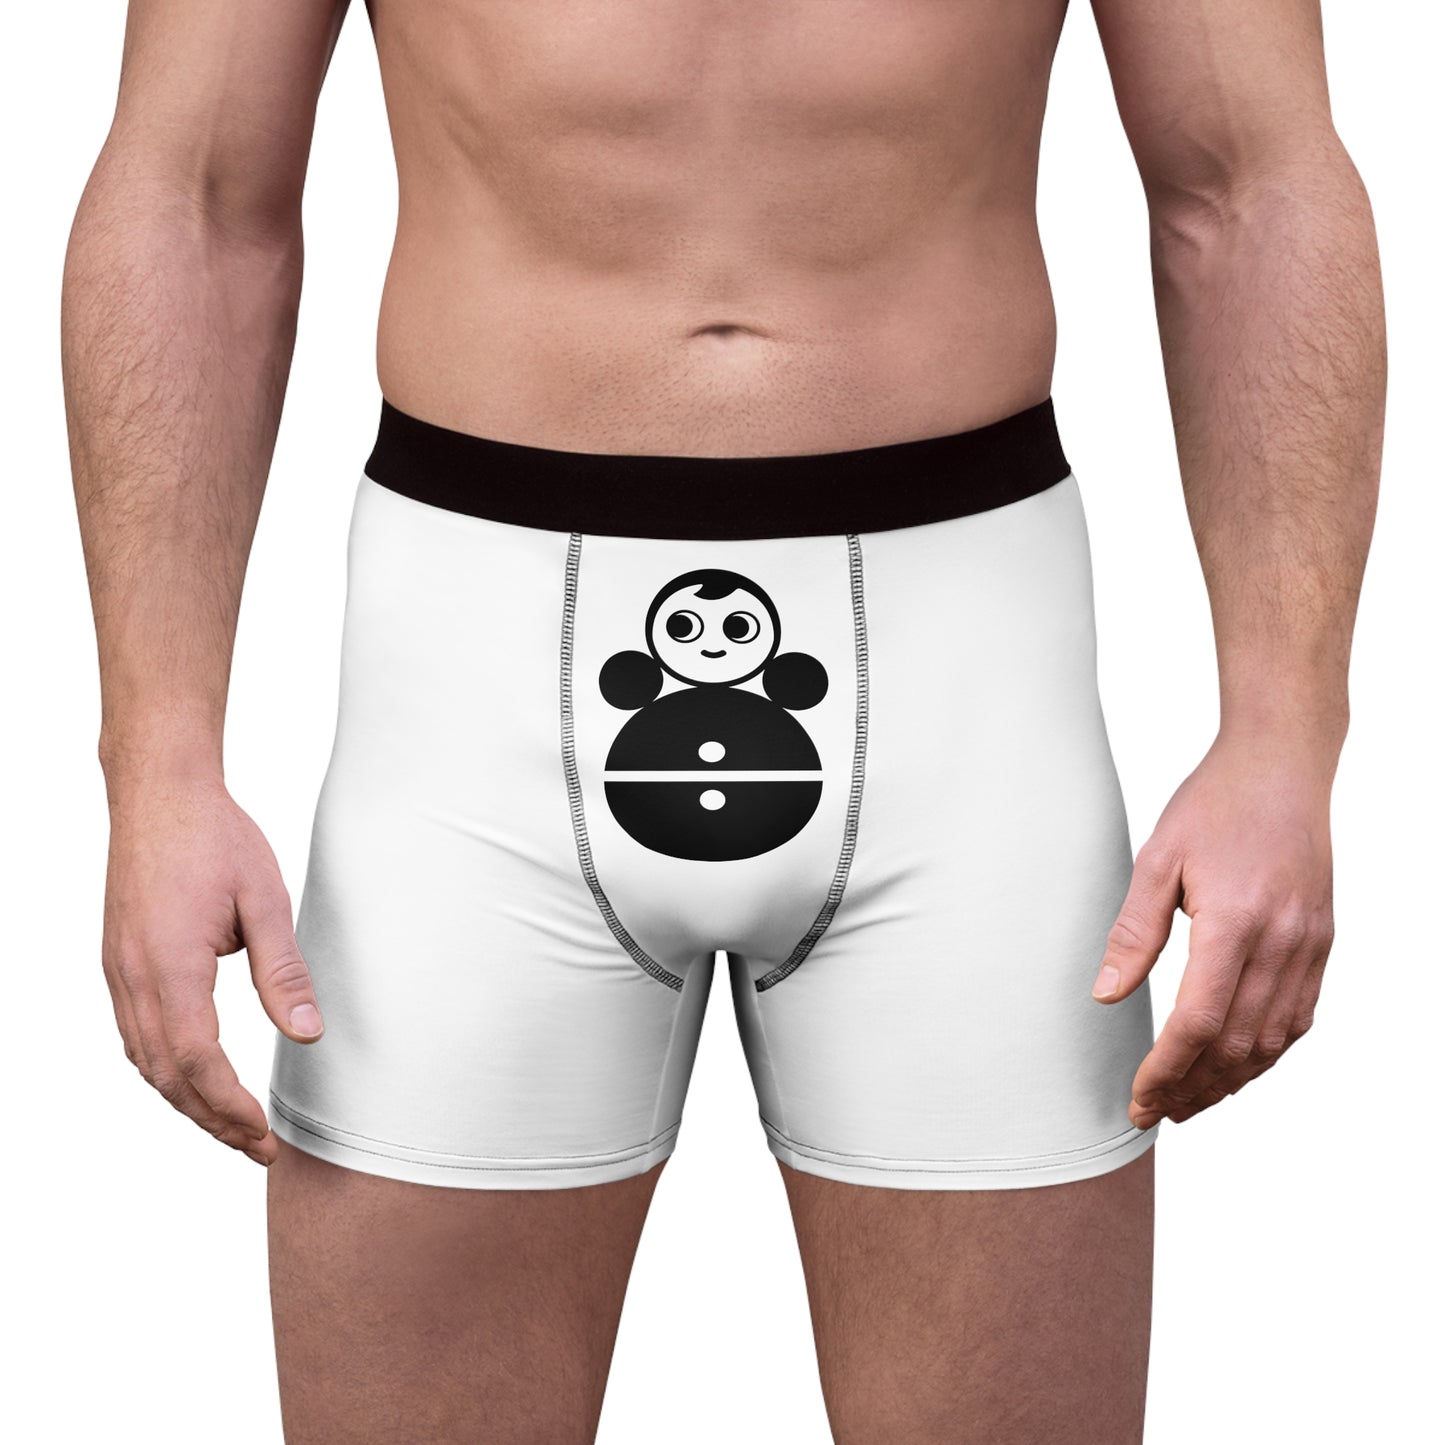 Soviet Roly-Poly Boxer Briefs